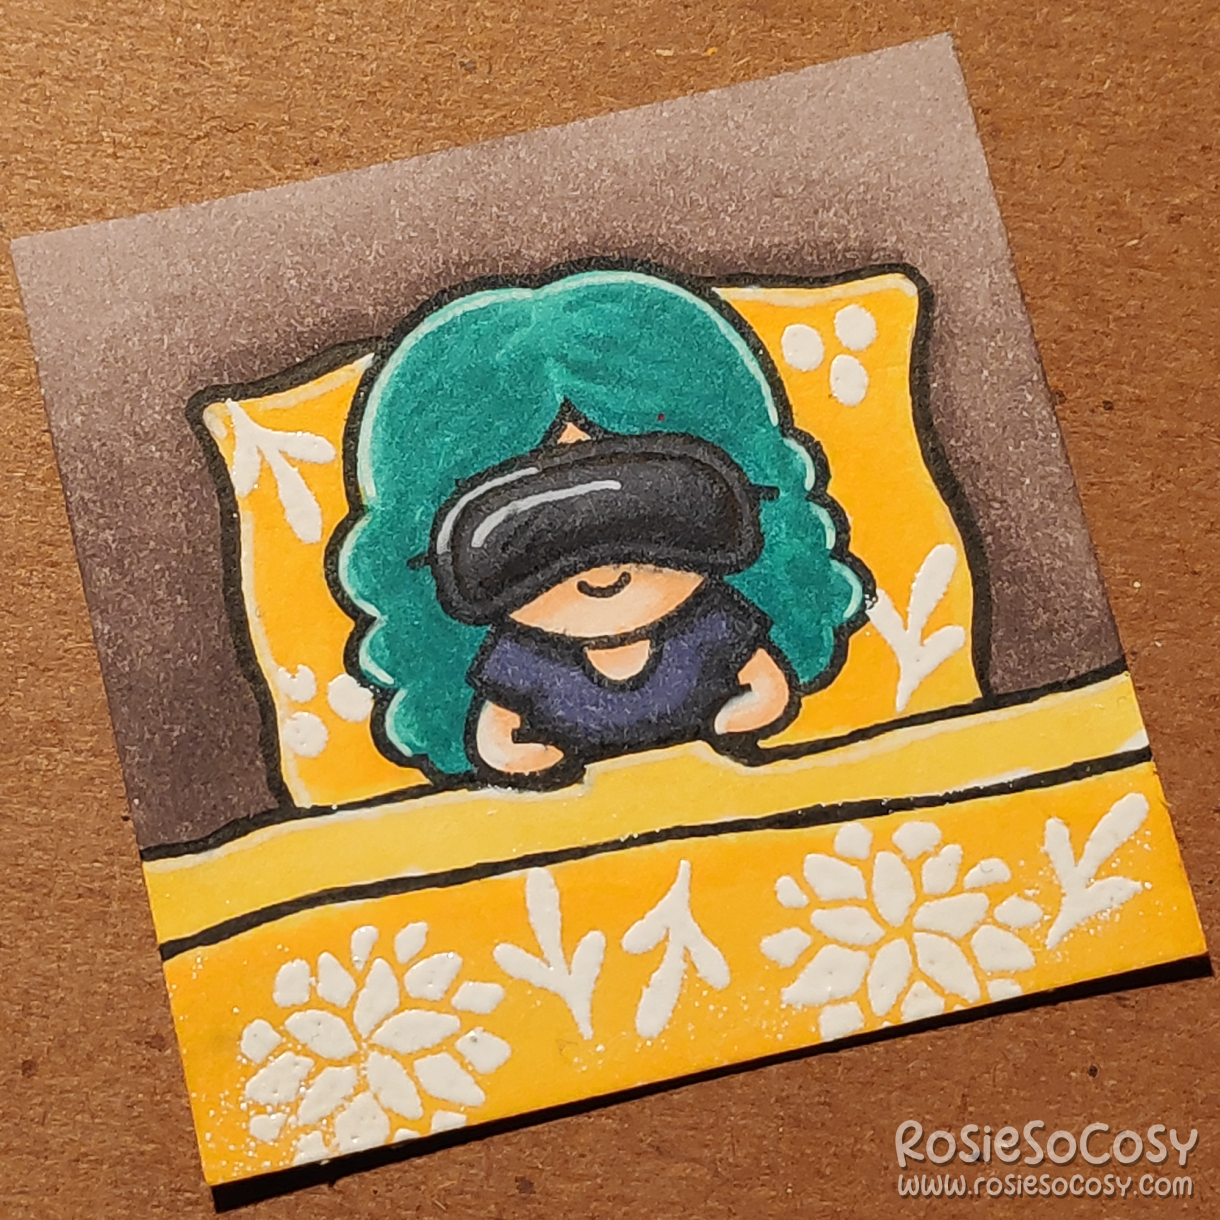 A tiny 2 inch card with a girl sleeping in a bed. She is wearing a black sleeping mask, a very dark bluish grey shirt, and her duvet is a bright yellow with white floral elements.